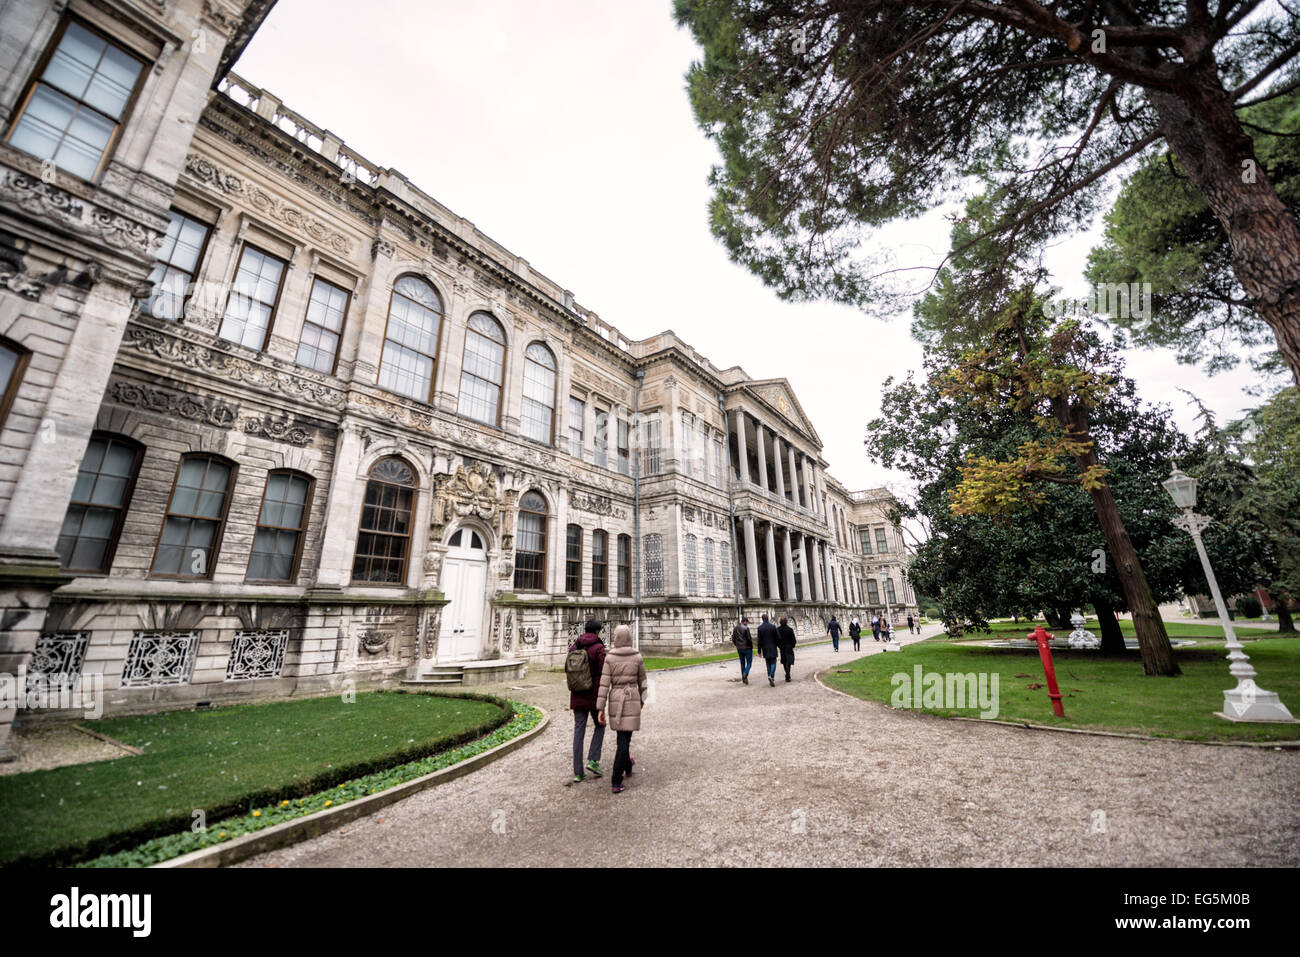 ISTANBUL, Turkey (Turkiye) — Dolmabahçe Palace, on the banks of the Bosphorus Strait, was the administrative center of the Ottoman Empire from 1856 to 1887 and 1909 to 1922. Built and decorated in the Ottoman Baroque style, it stretches along a section of the European coast of the Bosphorus Strait in central Istanbul. Stock Photo